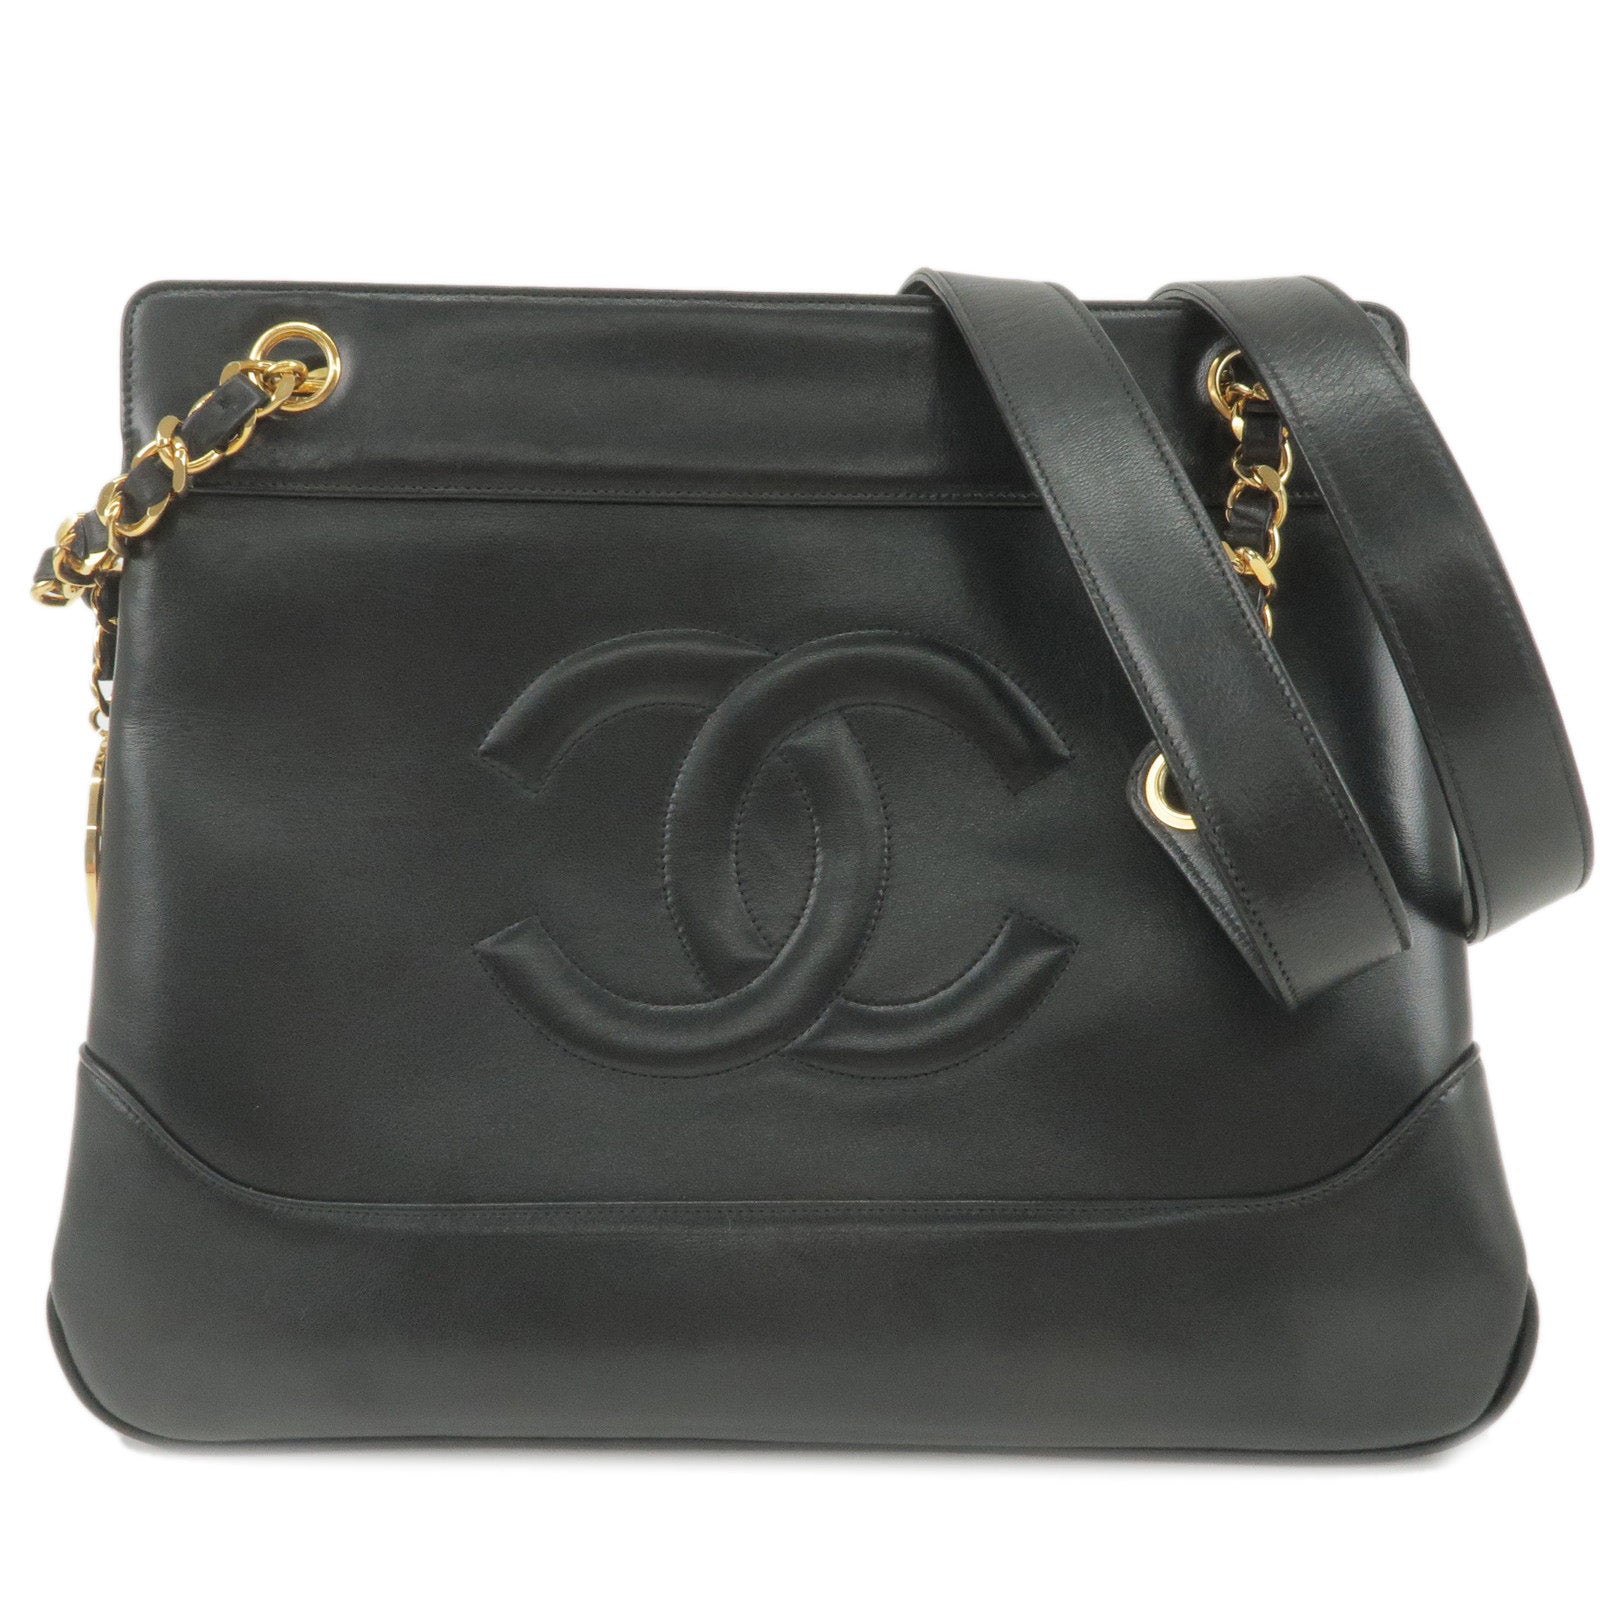 CHANEL Vintage CC Chain Caviar Leather Shopping Tote Bag Black